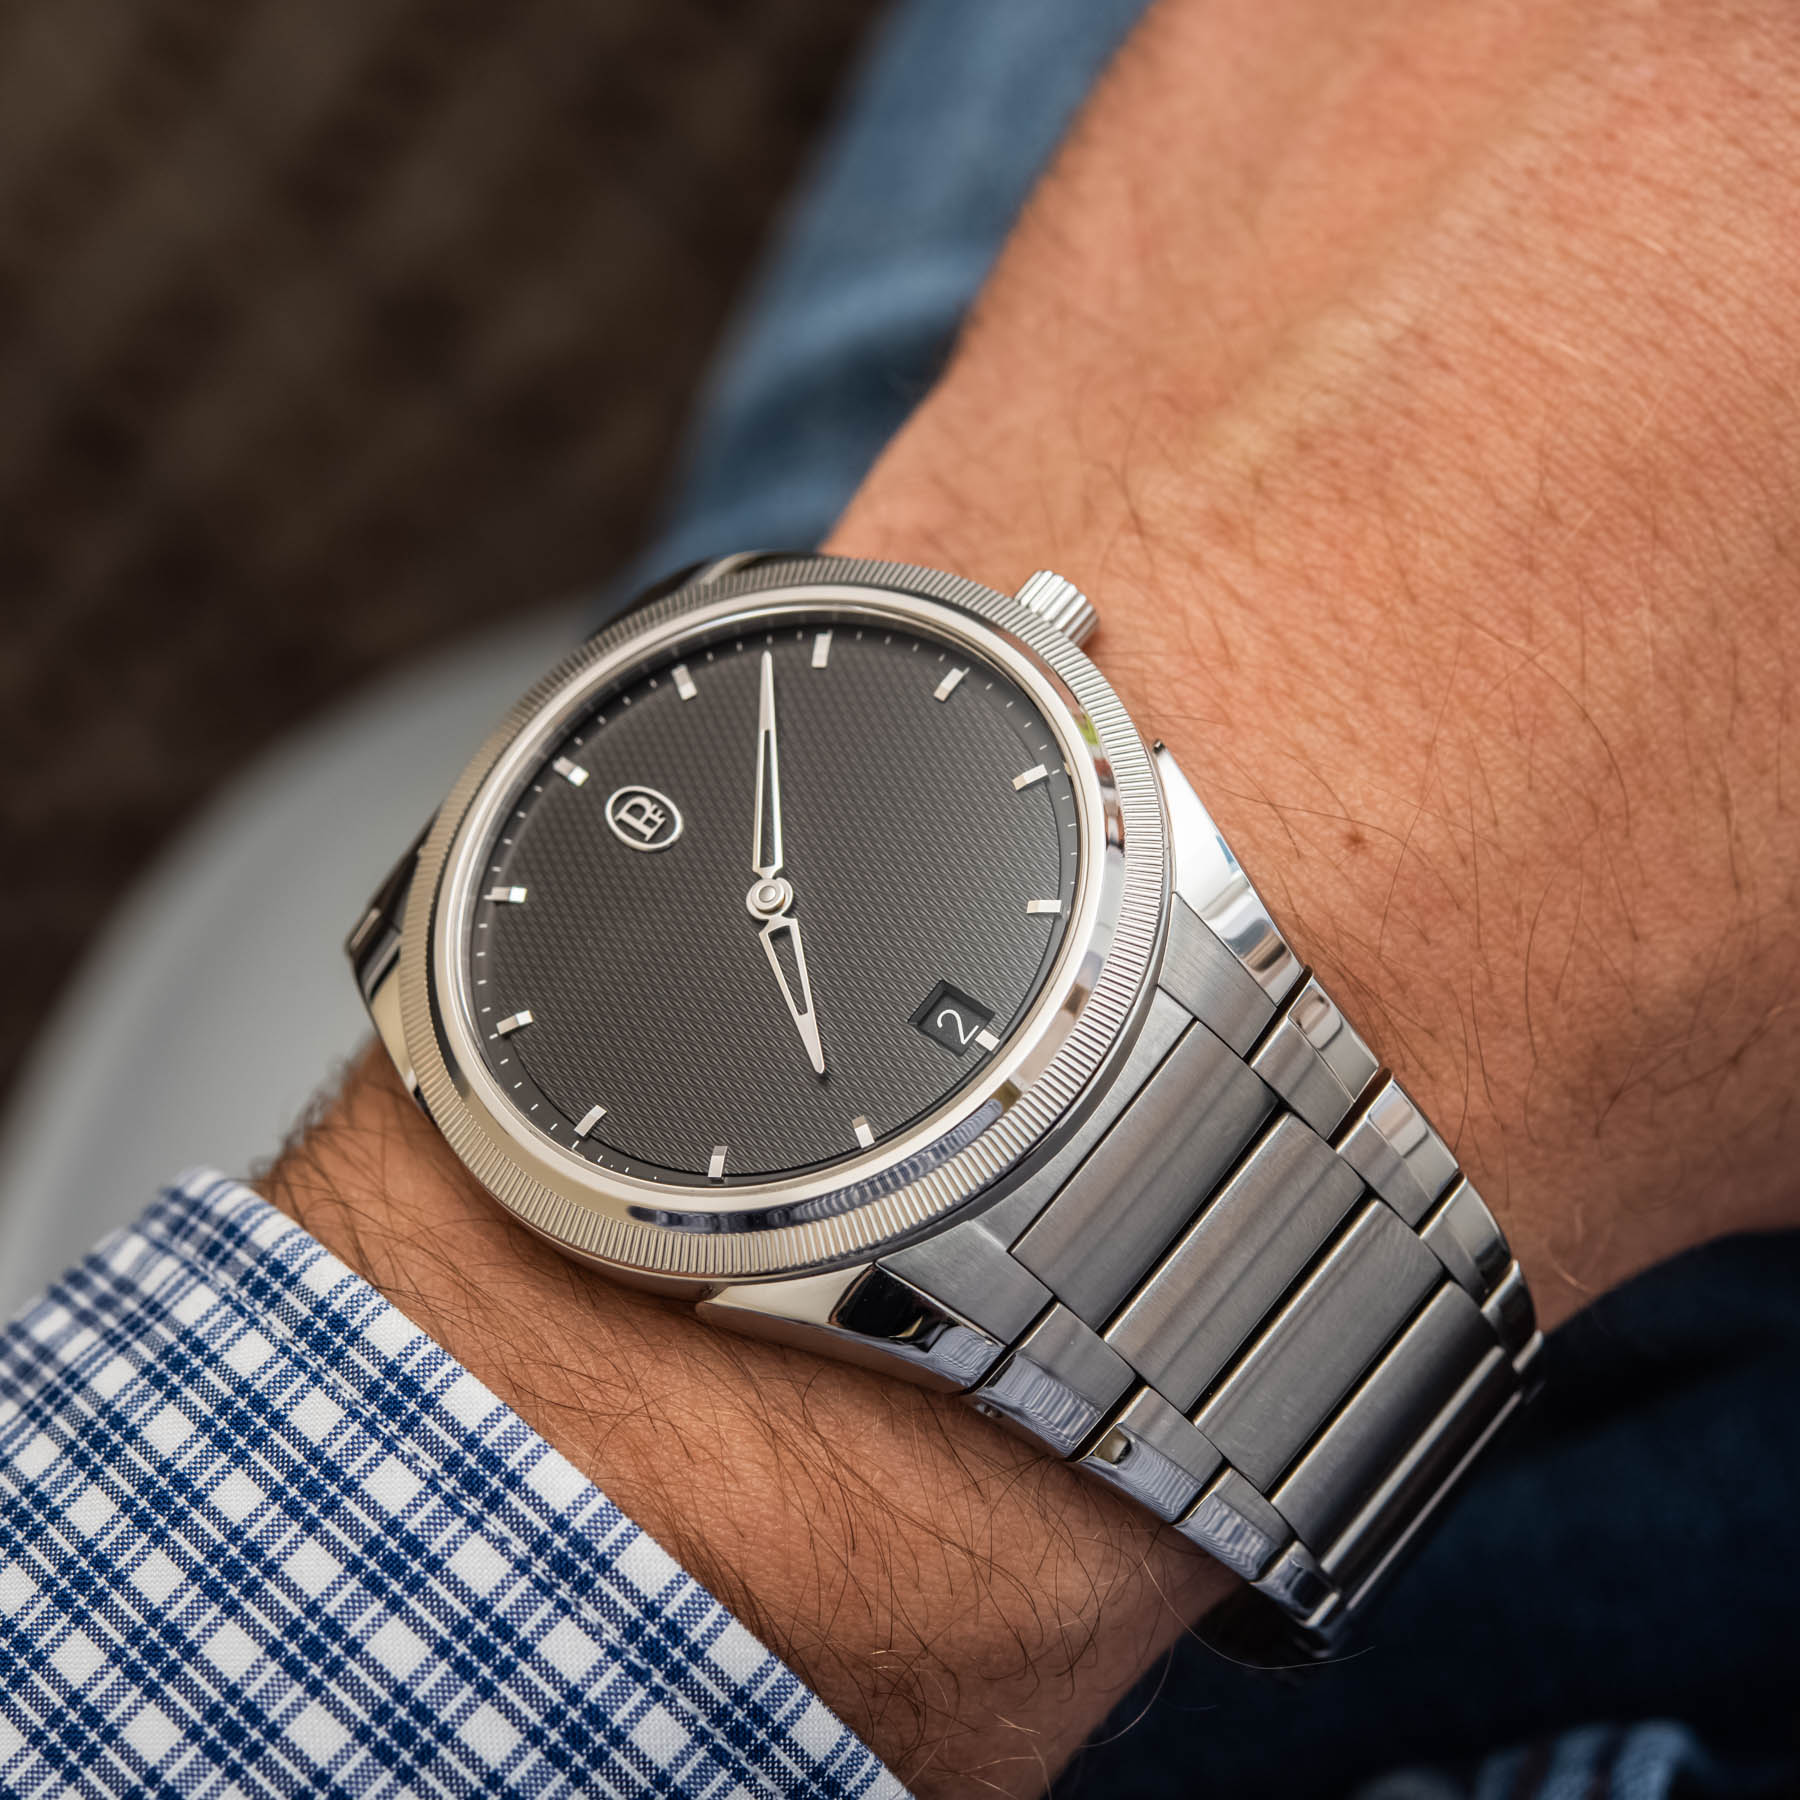 Hands-On With The Parmigiani Fleurier Tonda PF Collection | aBlogtoWatch